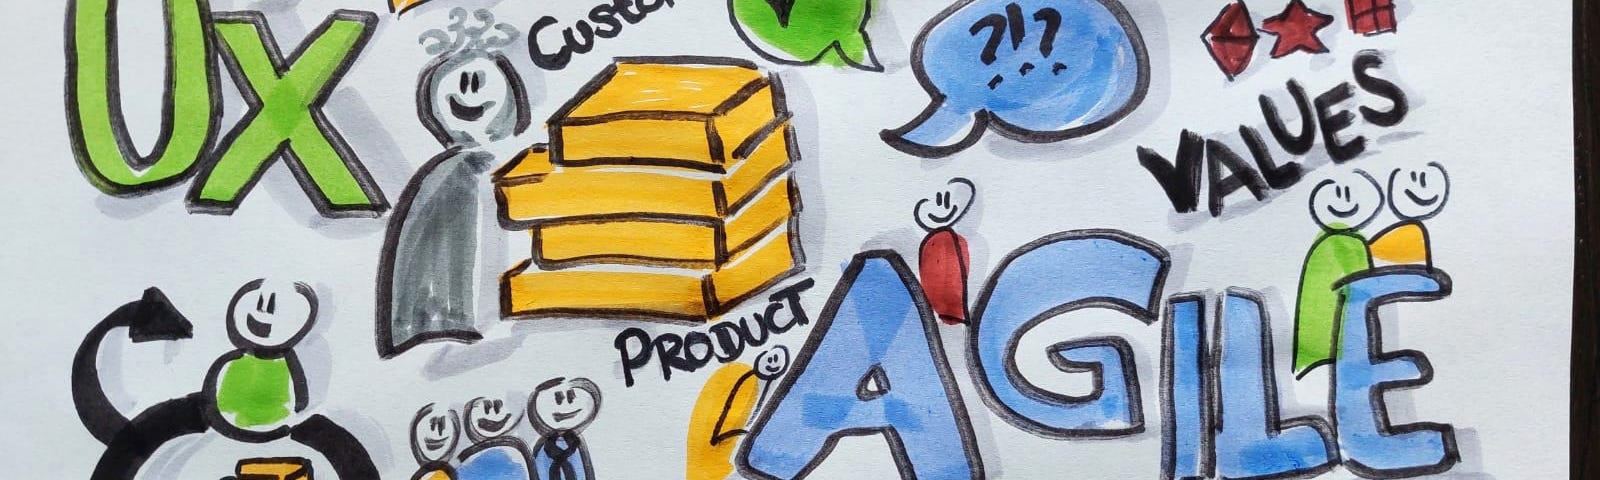 Ux in an agile context